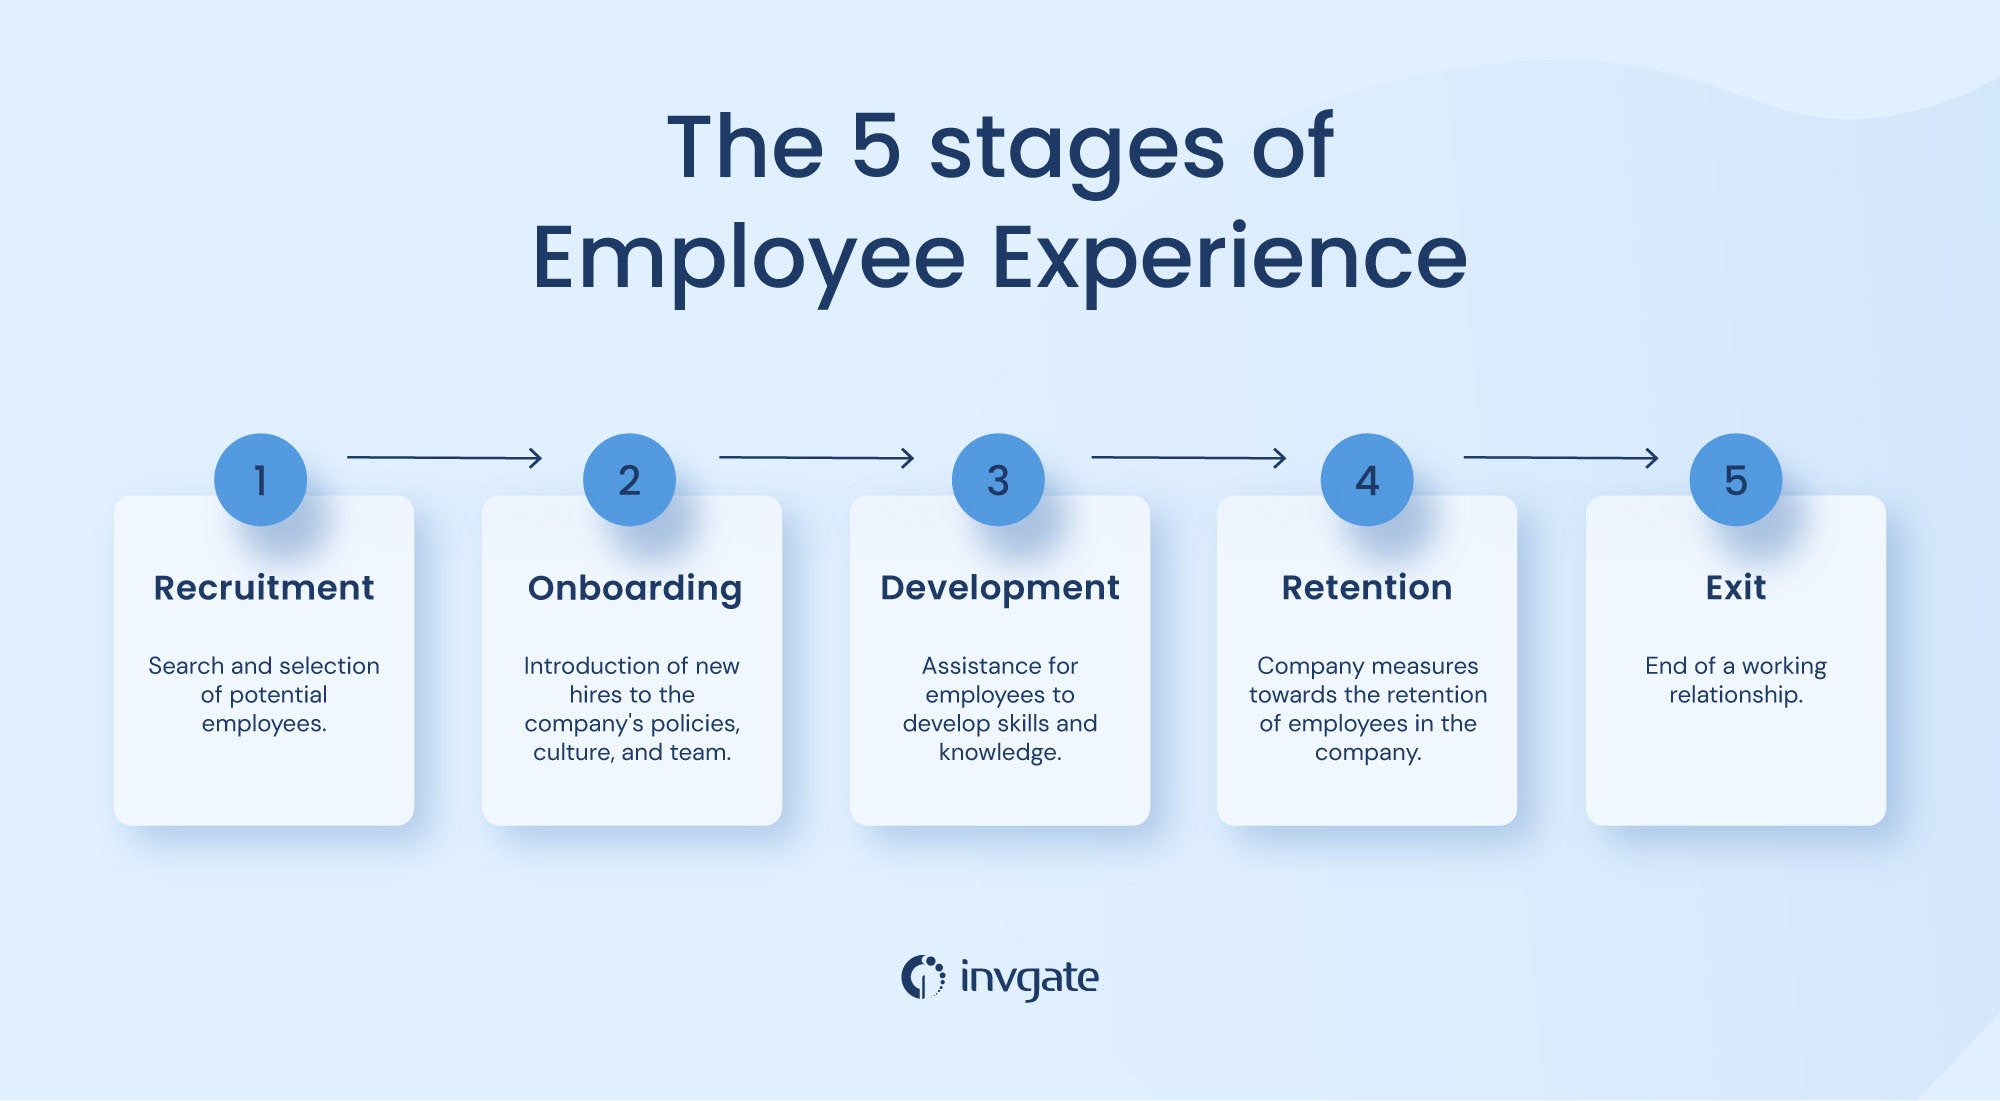 The five stages of employee experience are critical in providing a positive employee lifecycle.